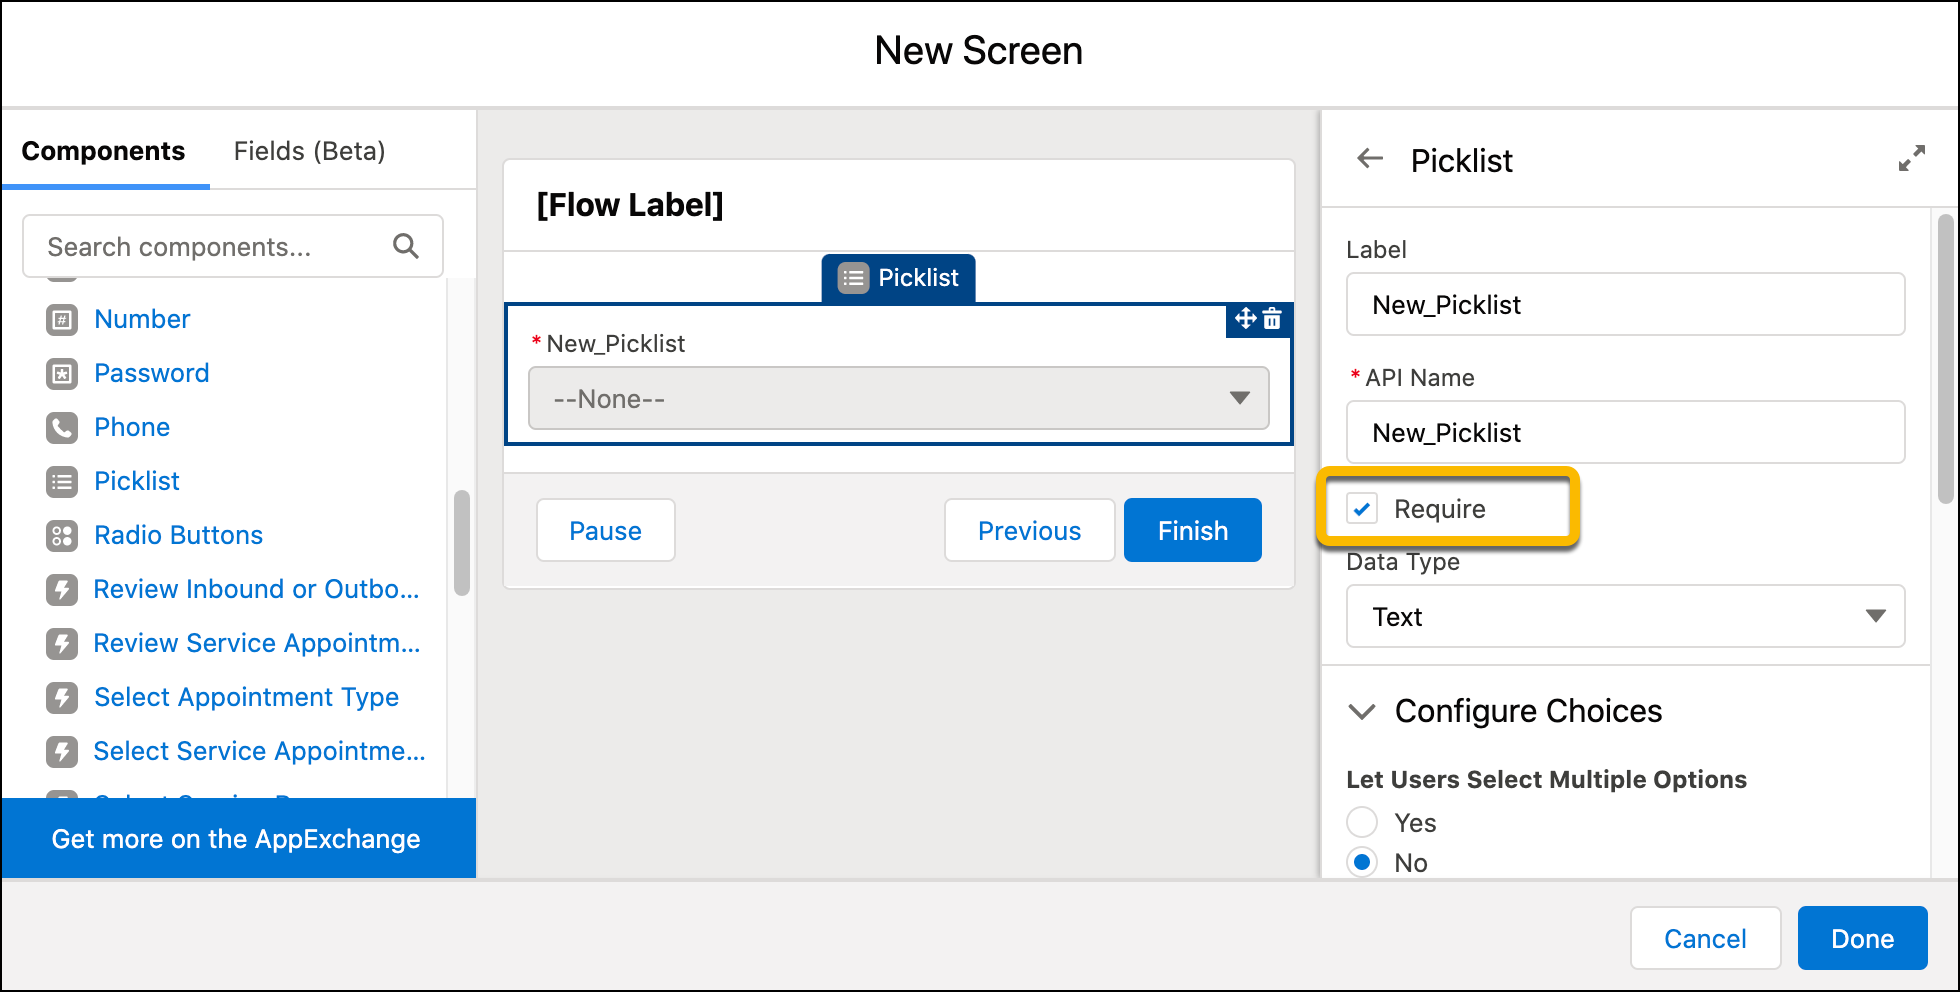 The flow admin sets up the picklist screen component with the new Required checkbox and the None picklist option value.